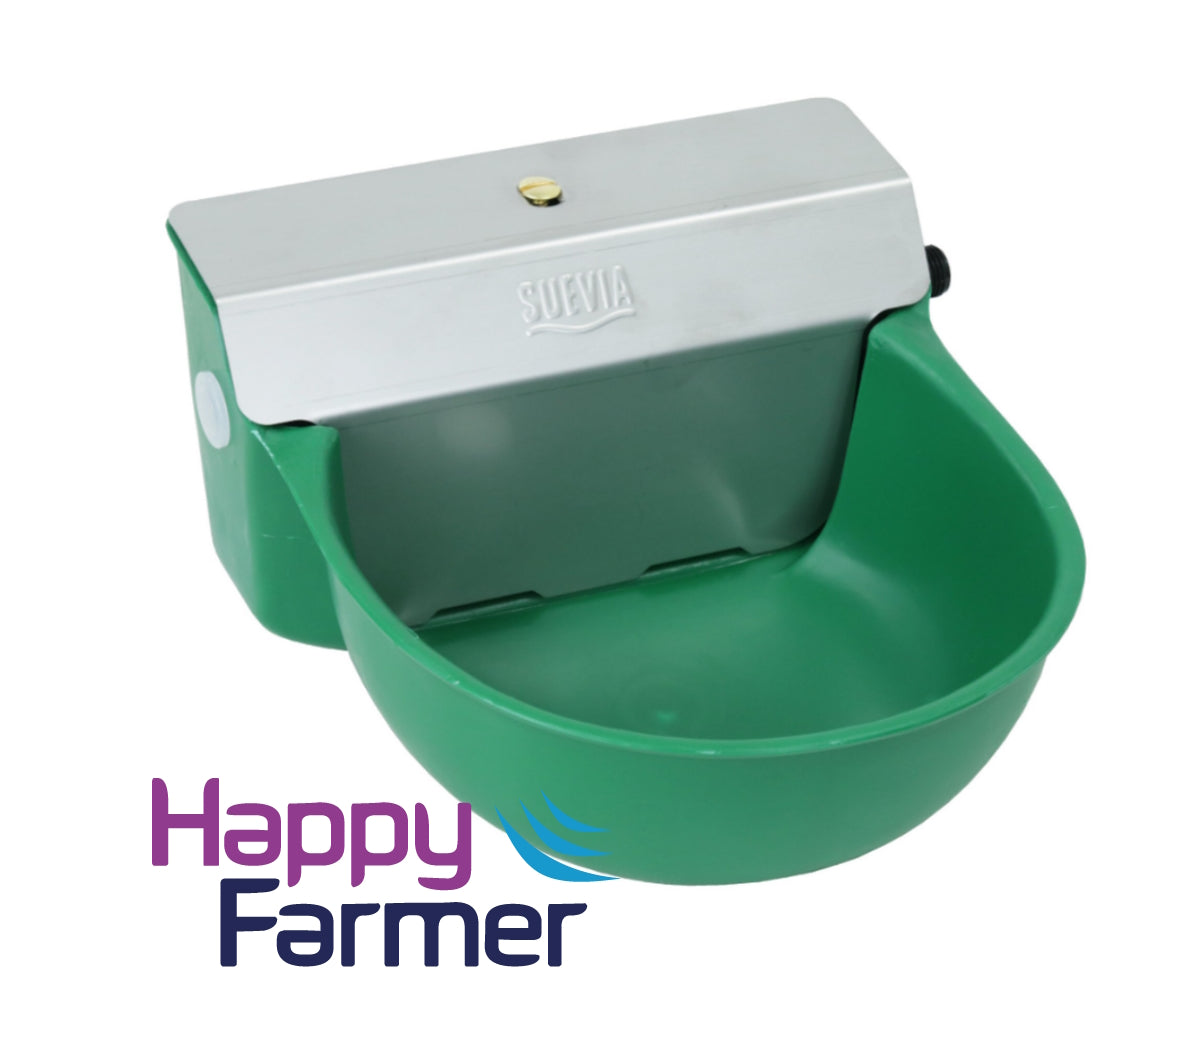 Drinking bin model 130p with smoother